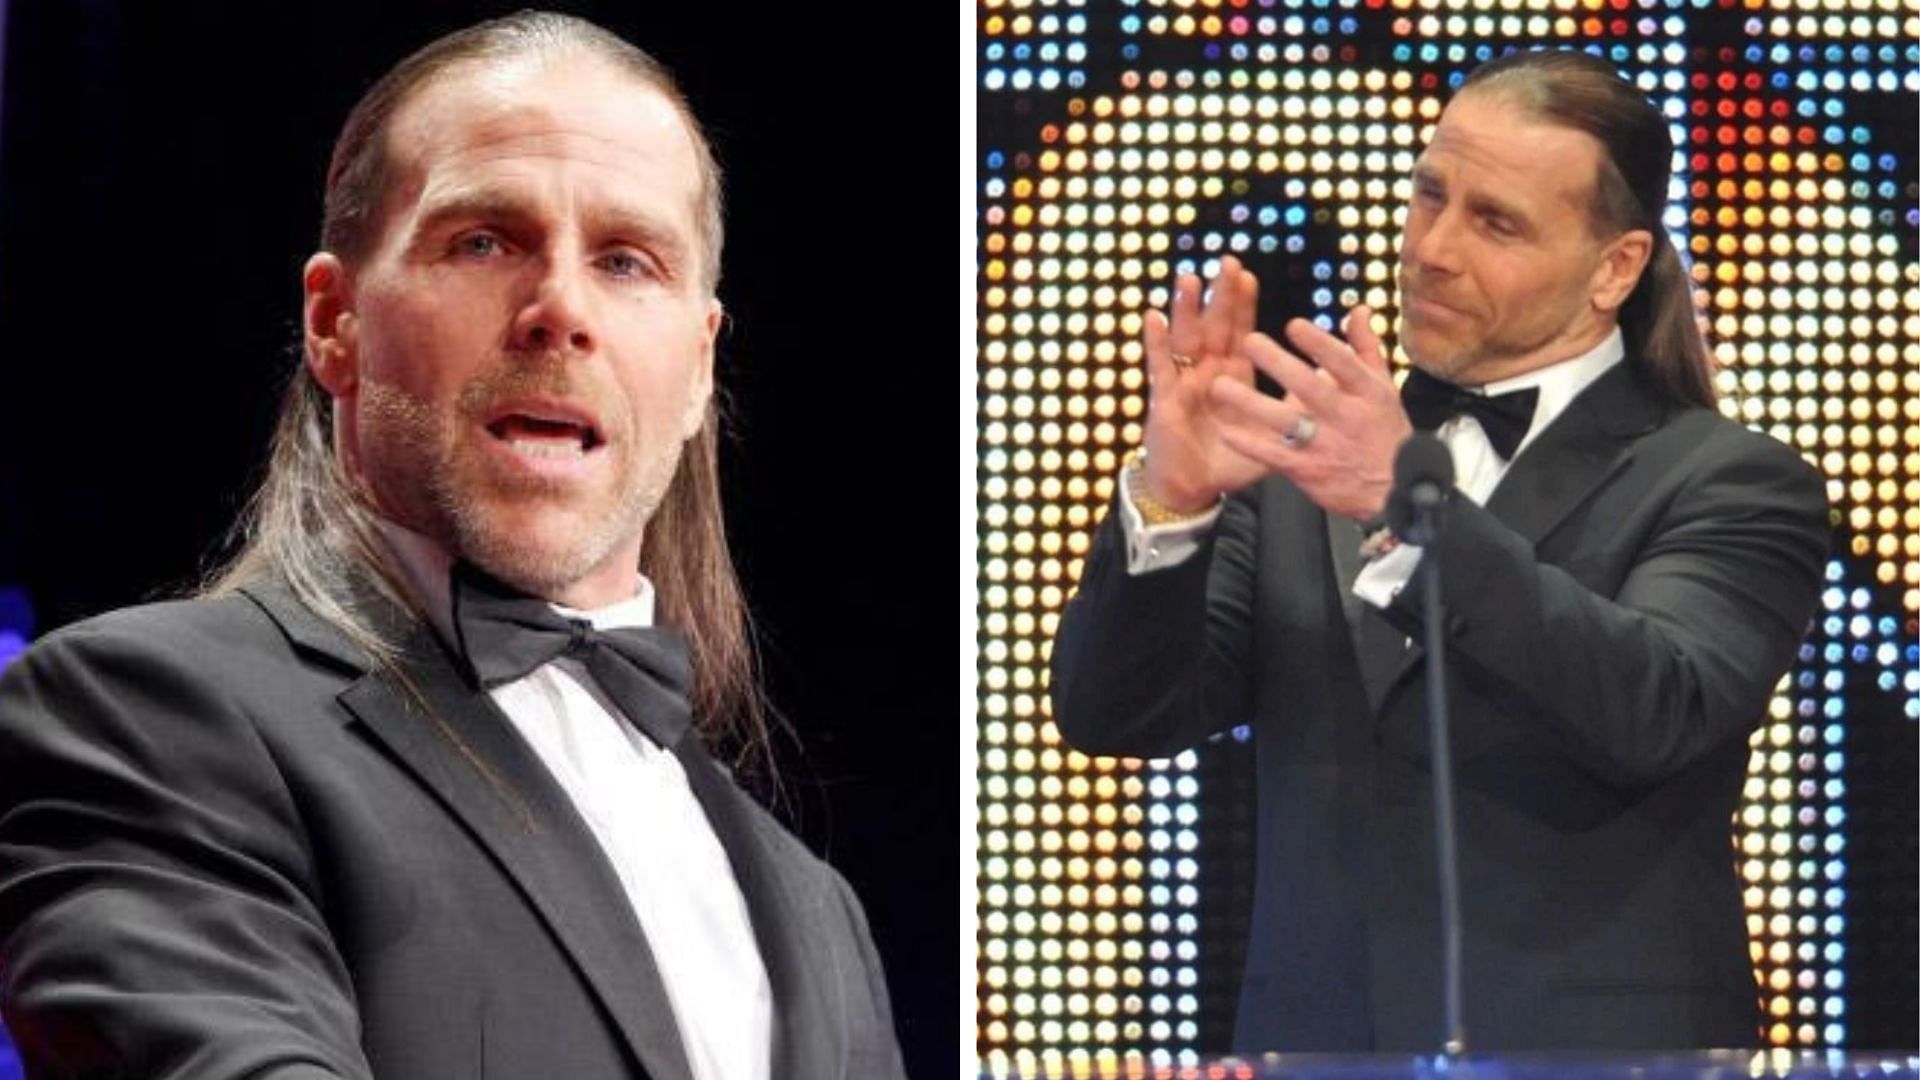 Shawn Michaels was inducted into the WWE Hall of Fame in 2011